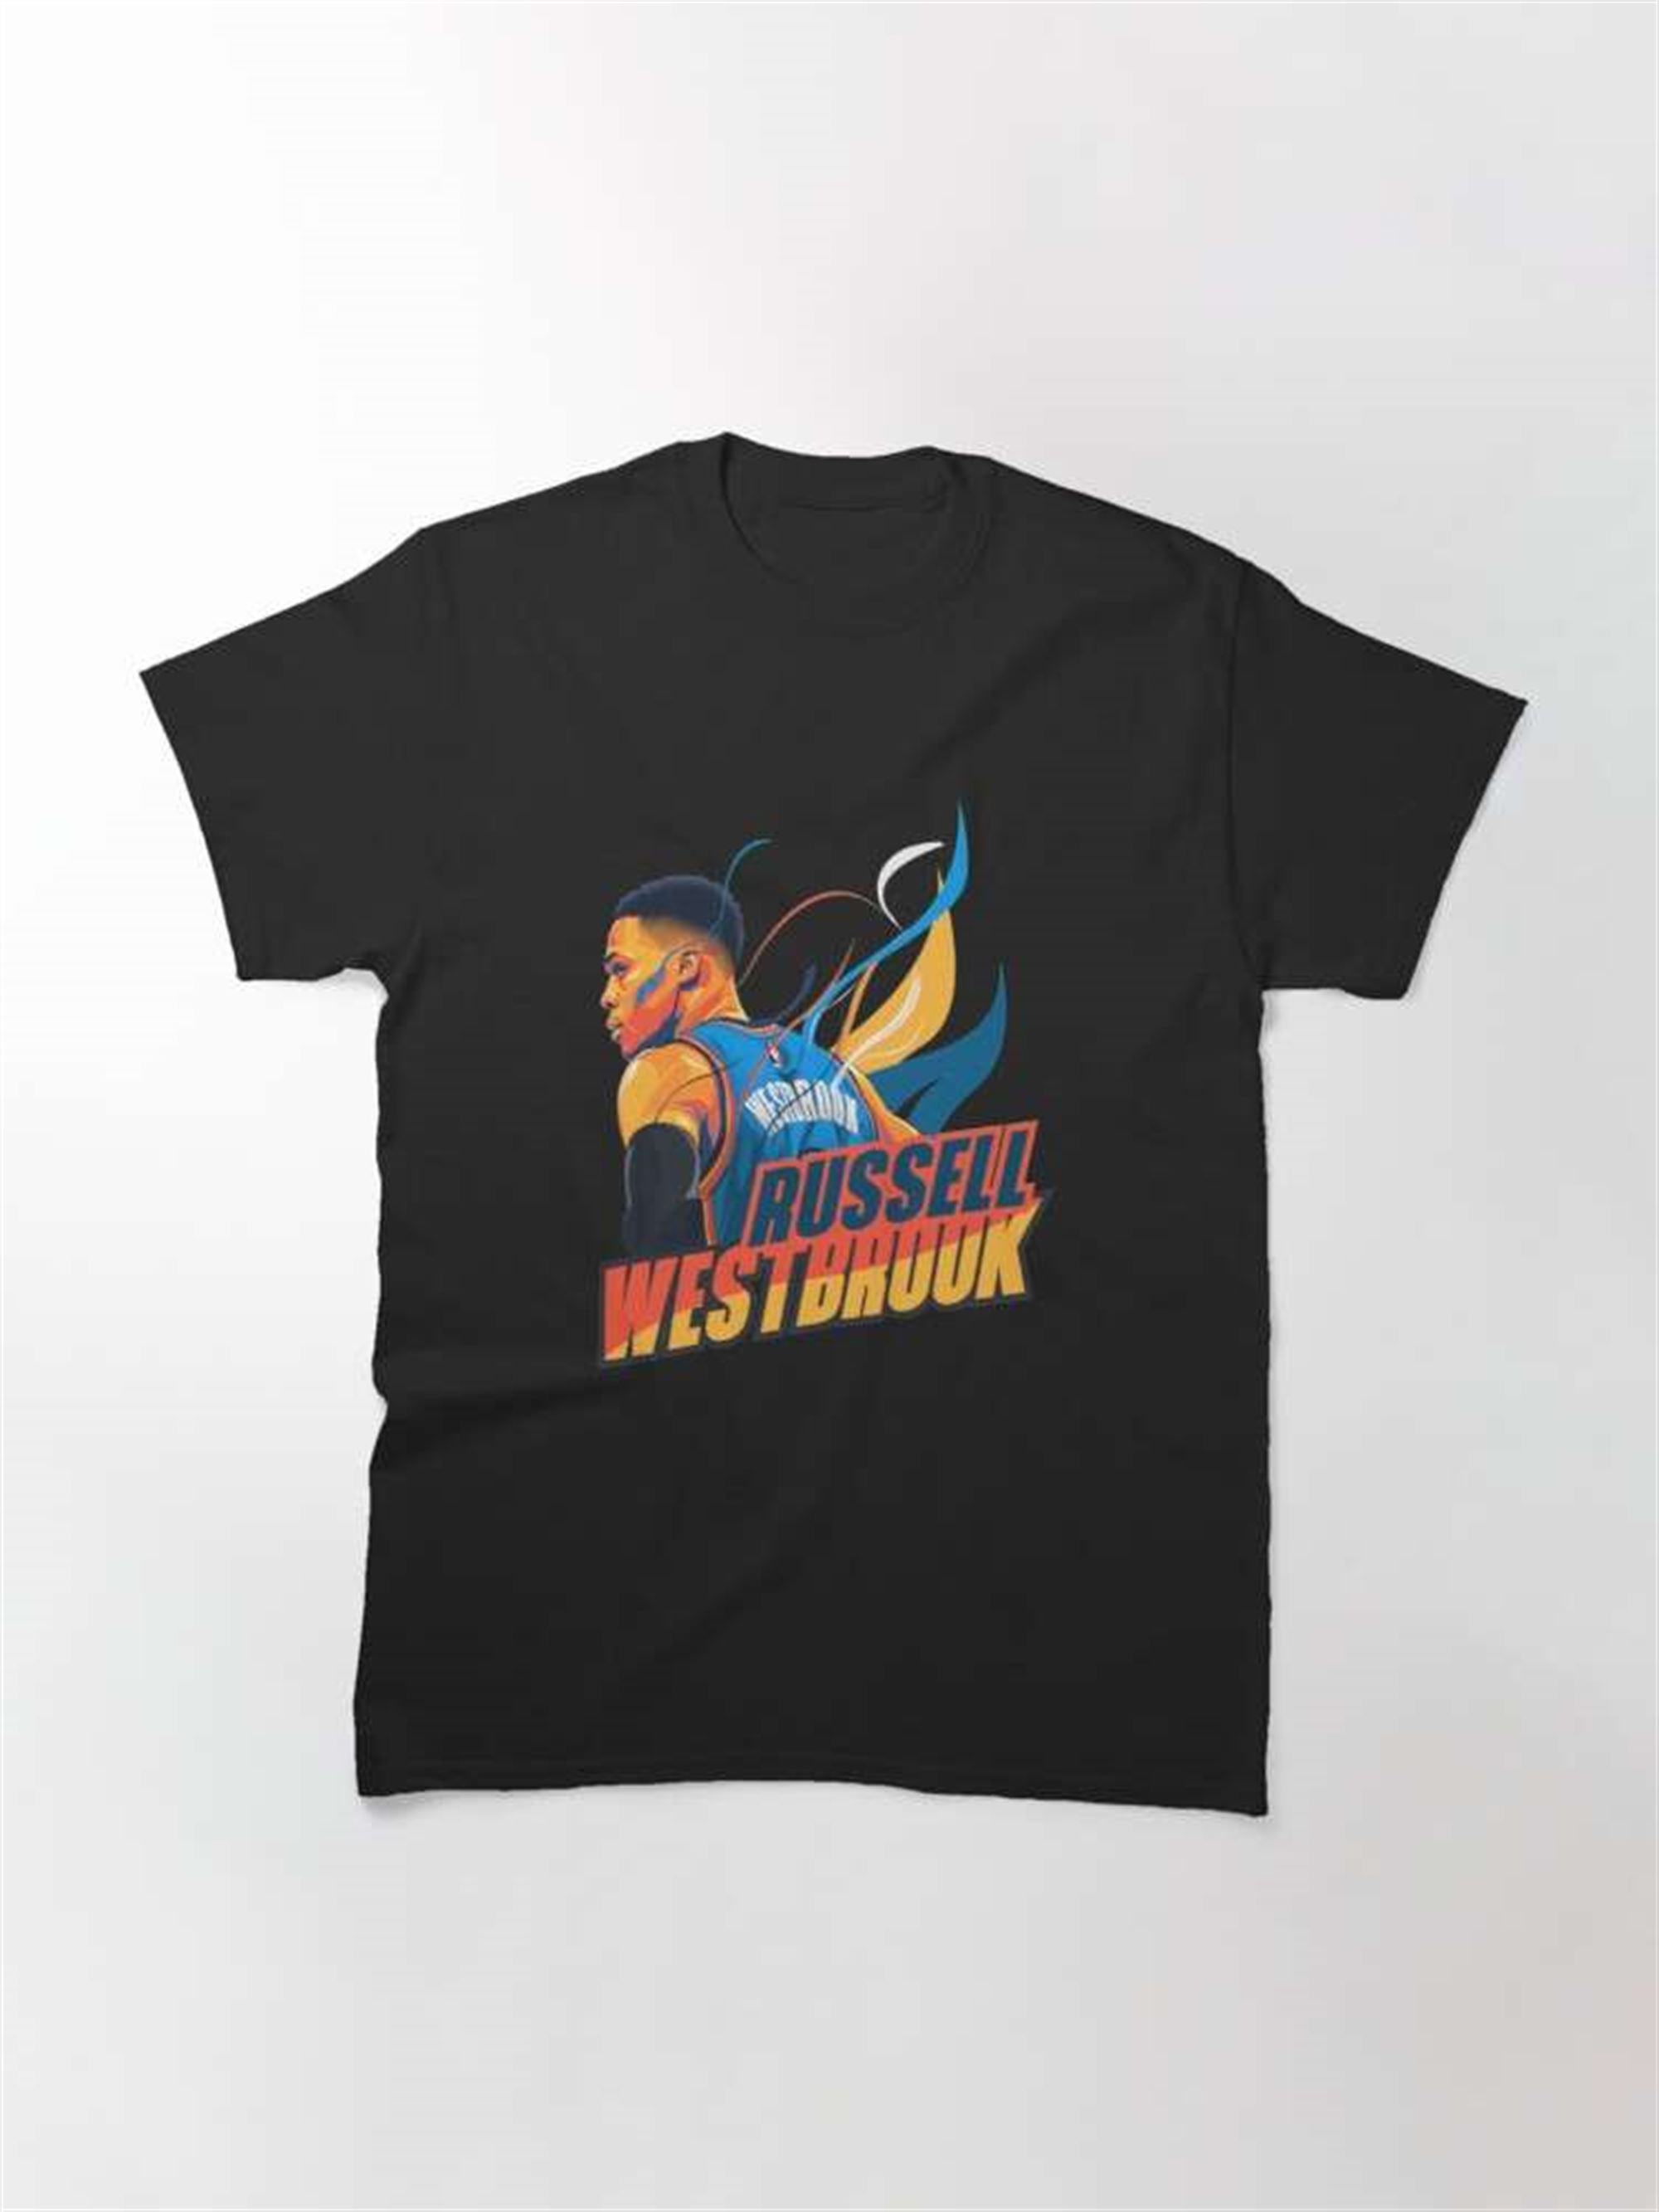 Russell Westbrook Classic Unisex T Shirt Size Up To 5xl